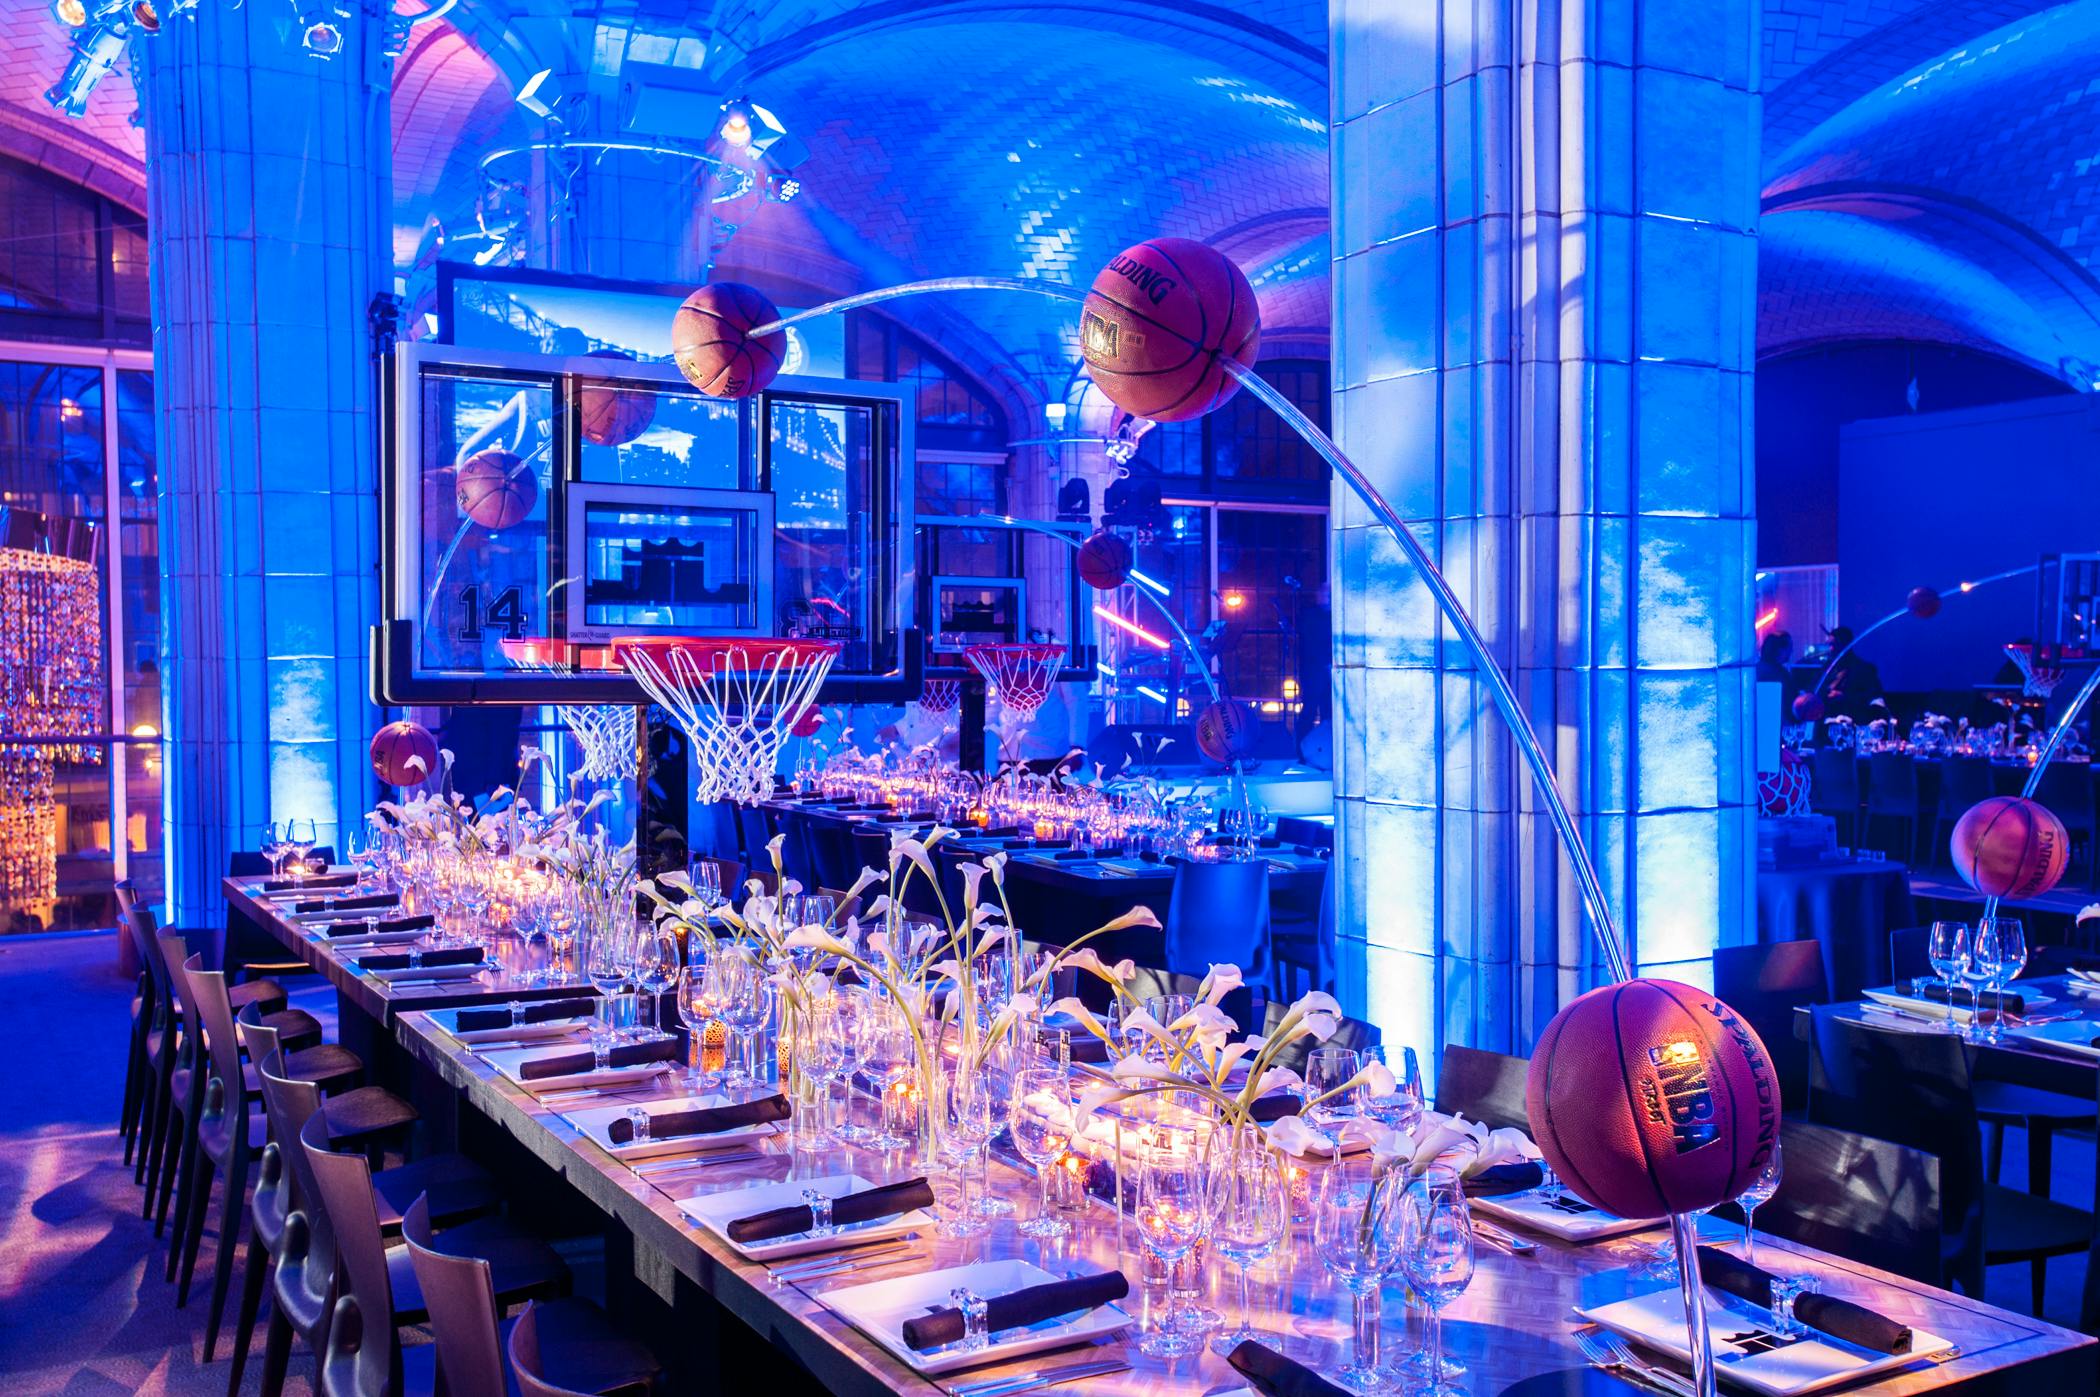 The Best Bar Mitzvah Centerpieces by Theme & Style - PartySlate